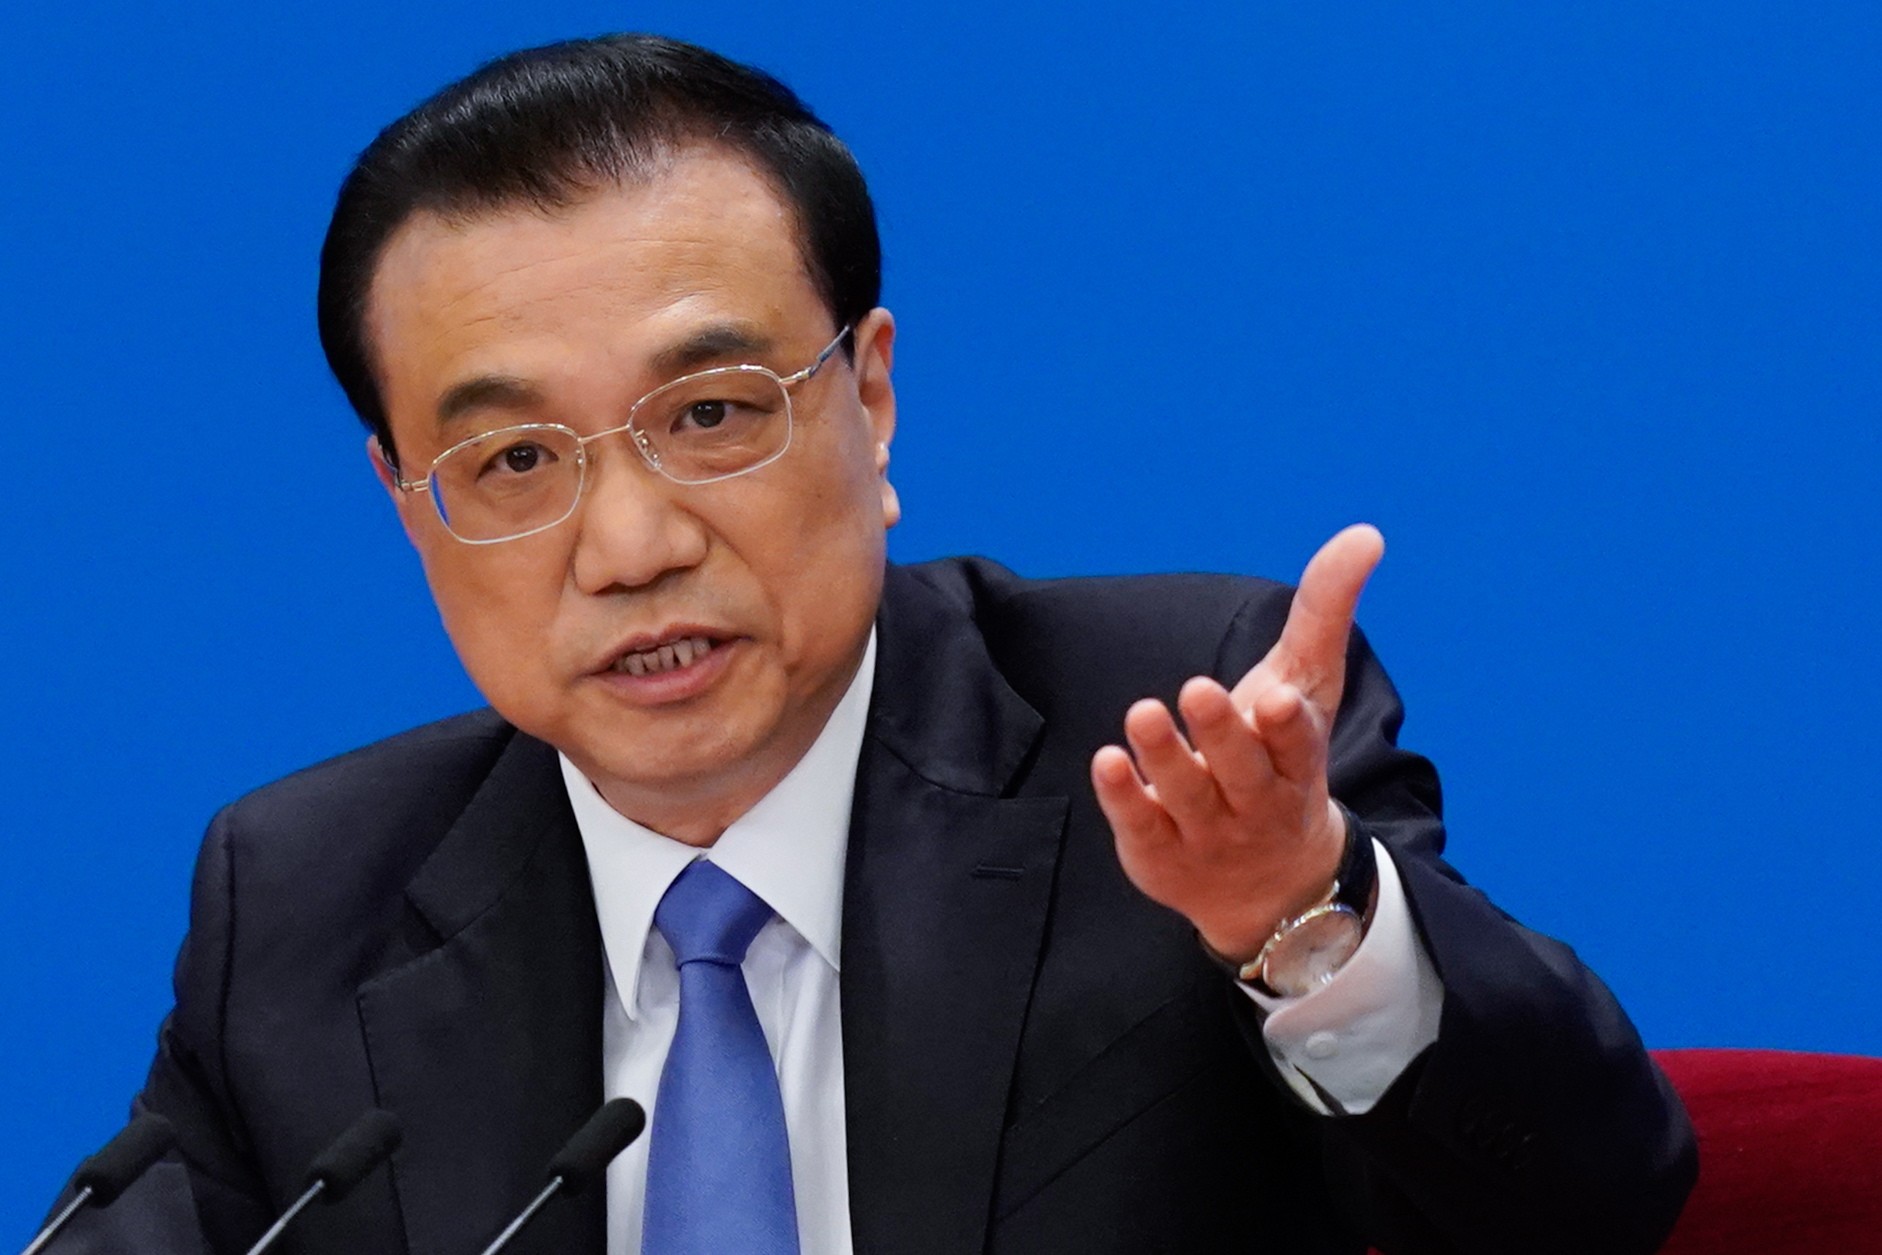 Li Keqiang spoke on Friday afternoon, shortly after the new law’s passage. Photo: EPA